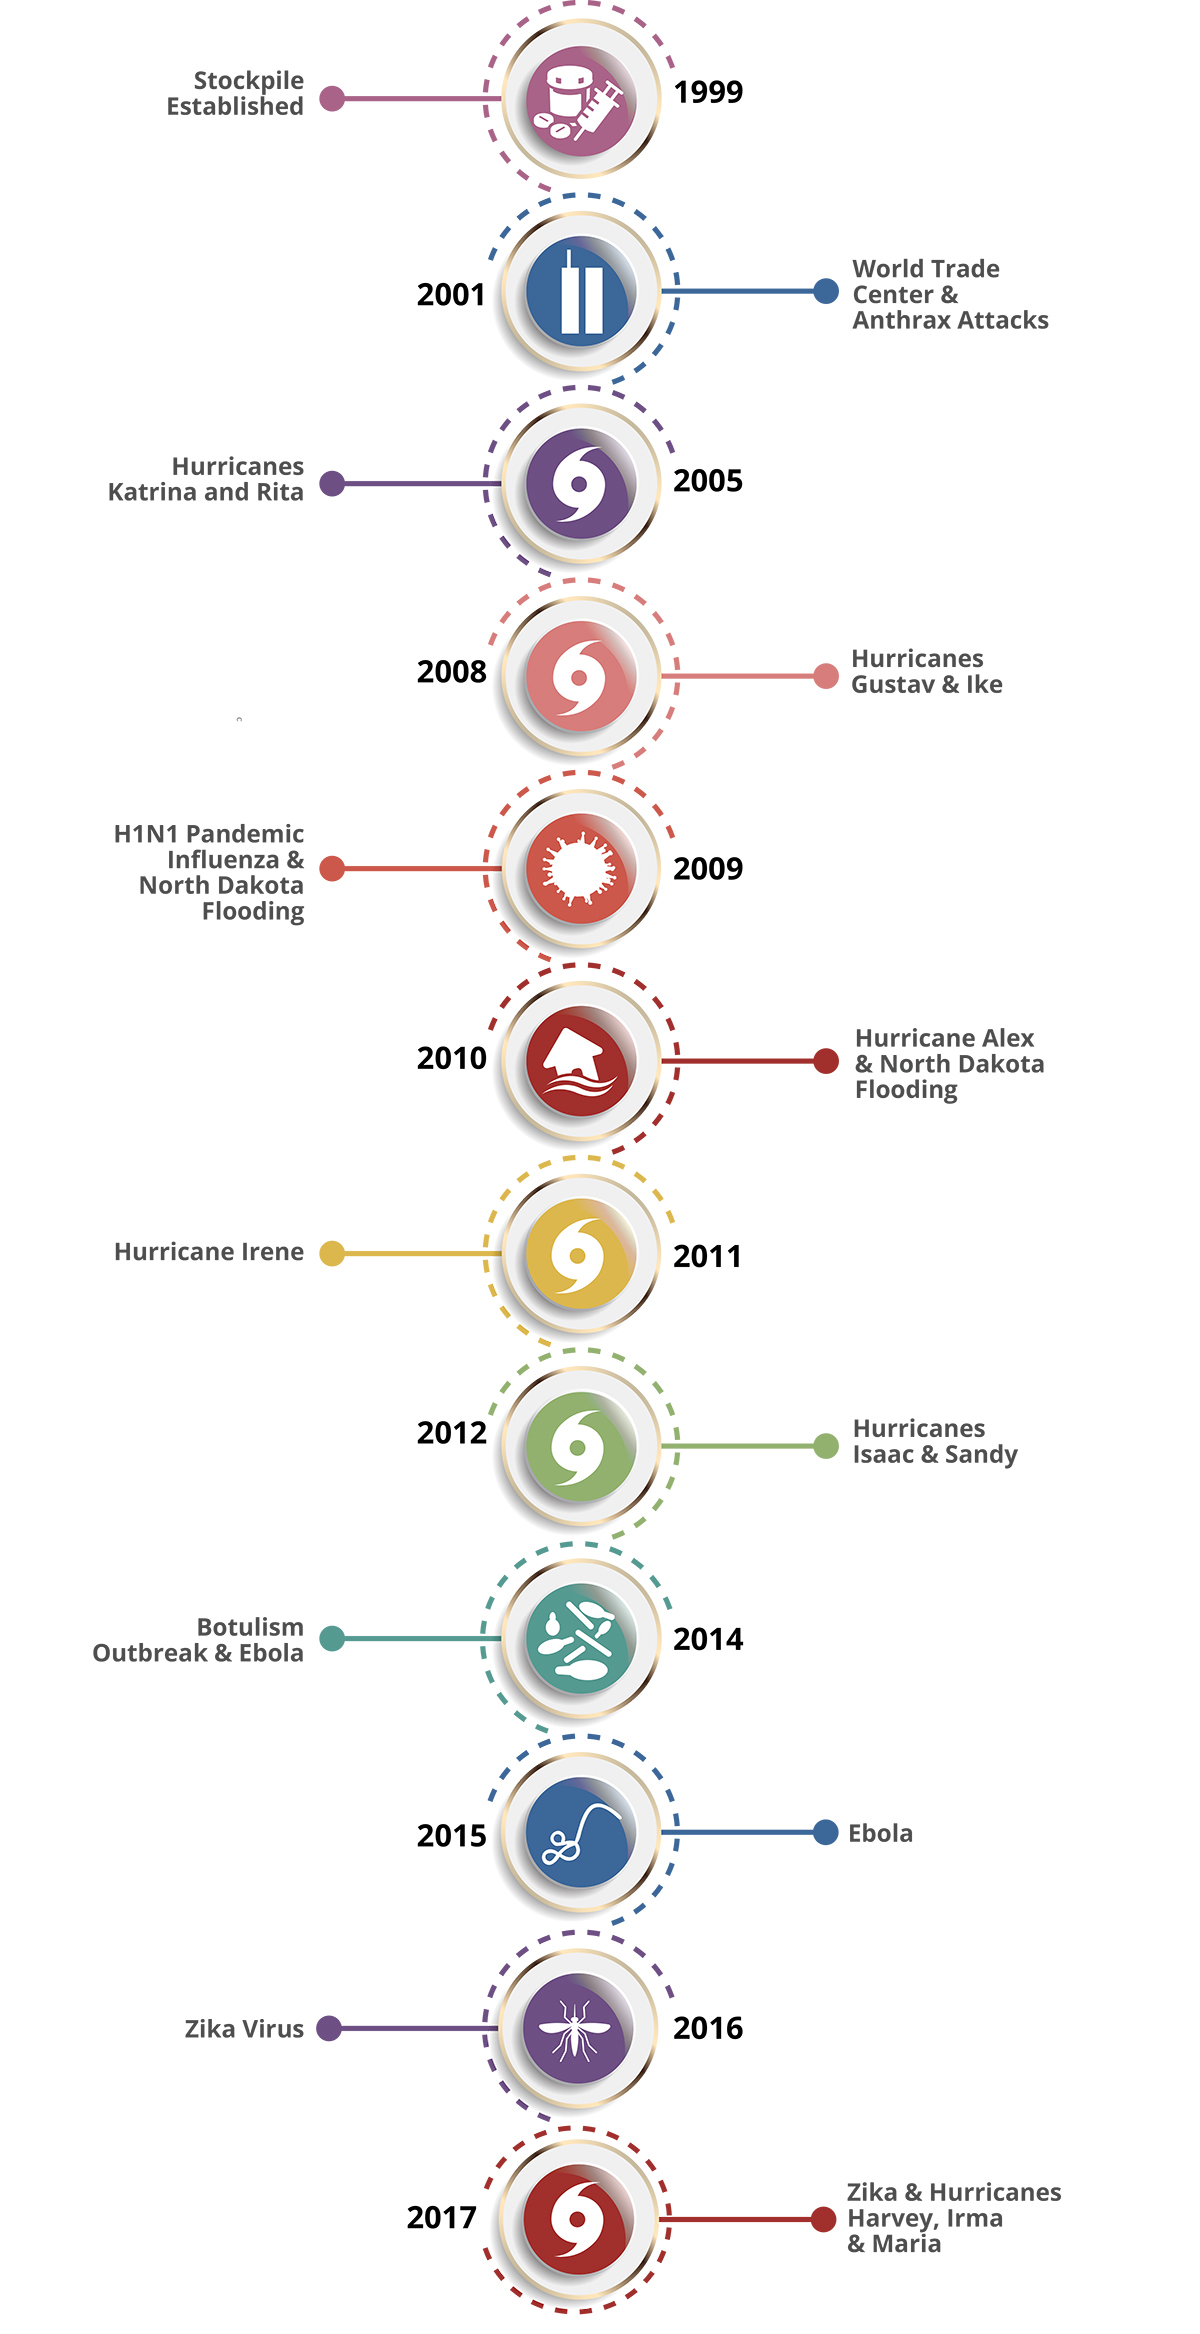 Timeline of CDC stockpile responses. Contents of this graphic are described in the text below.